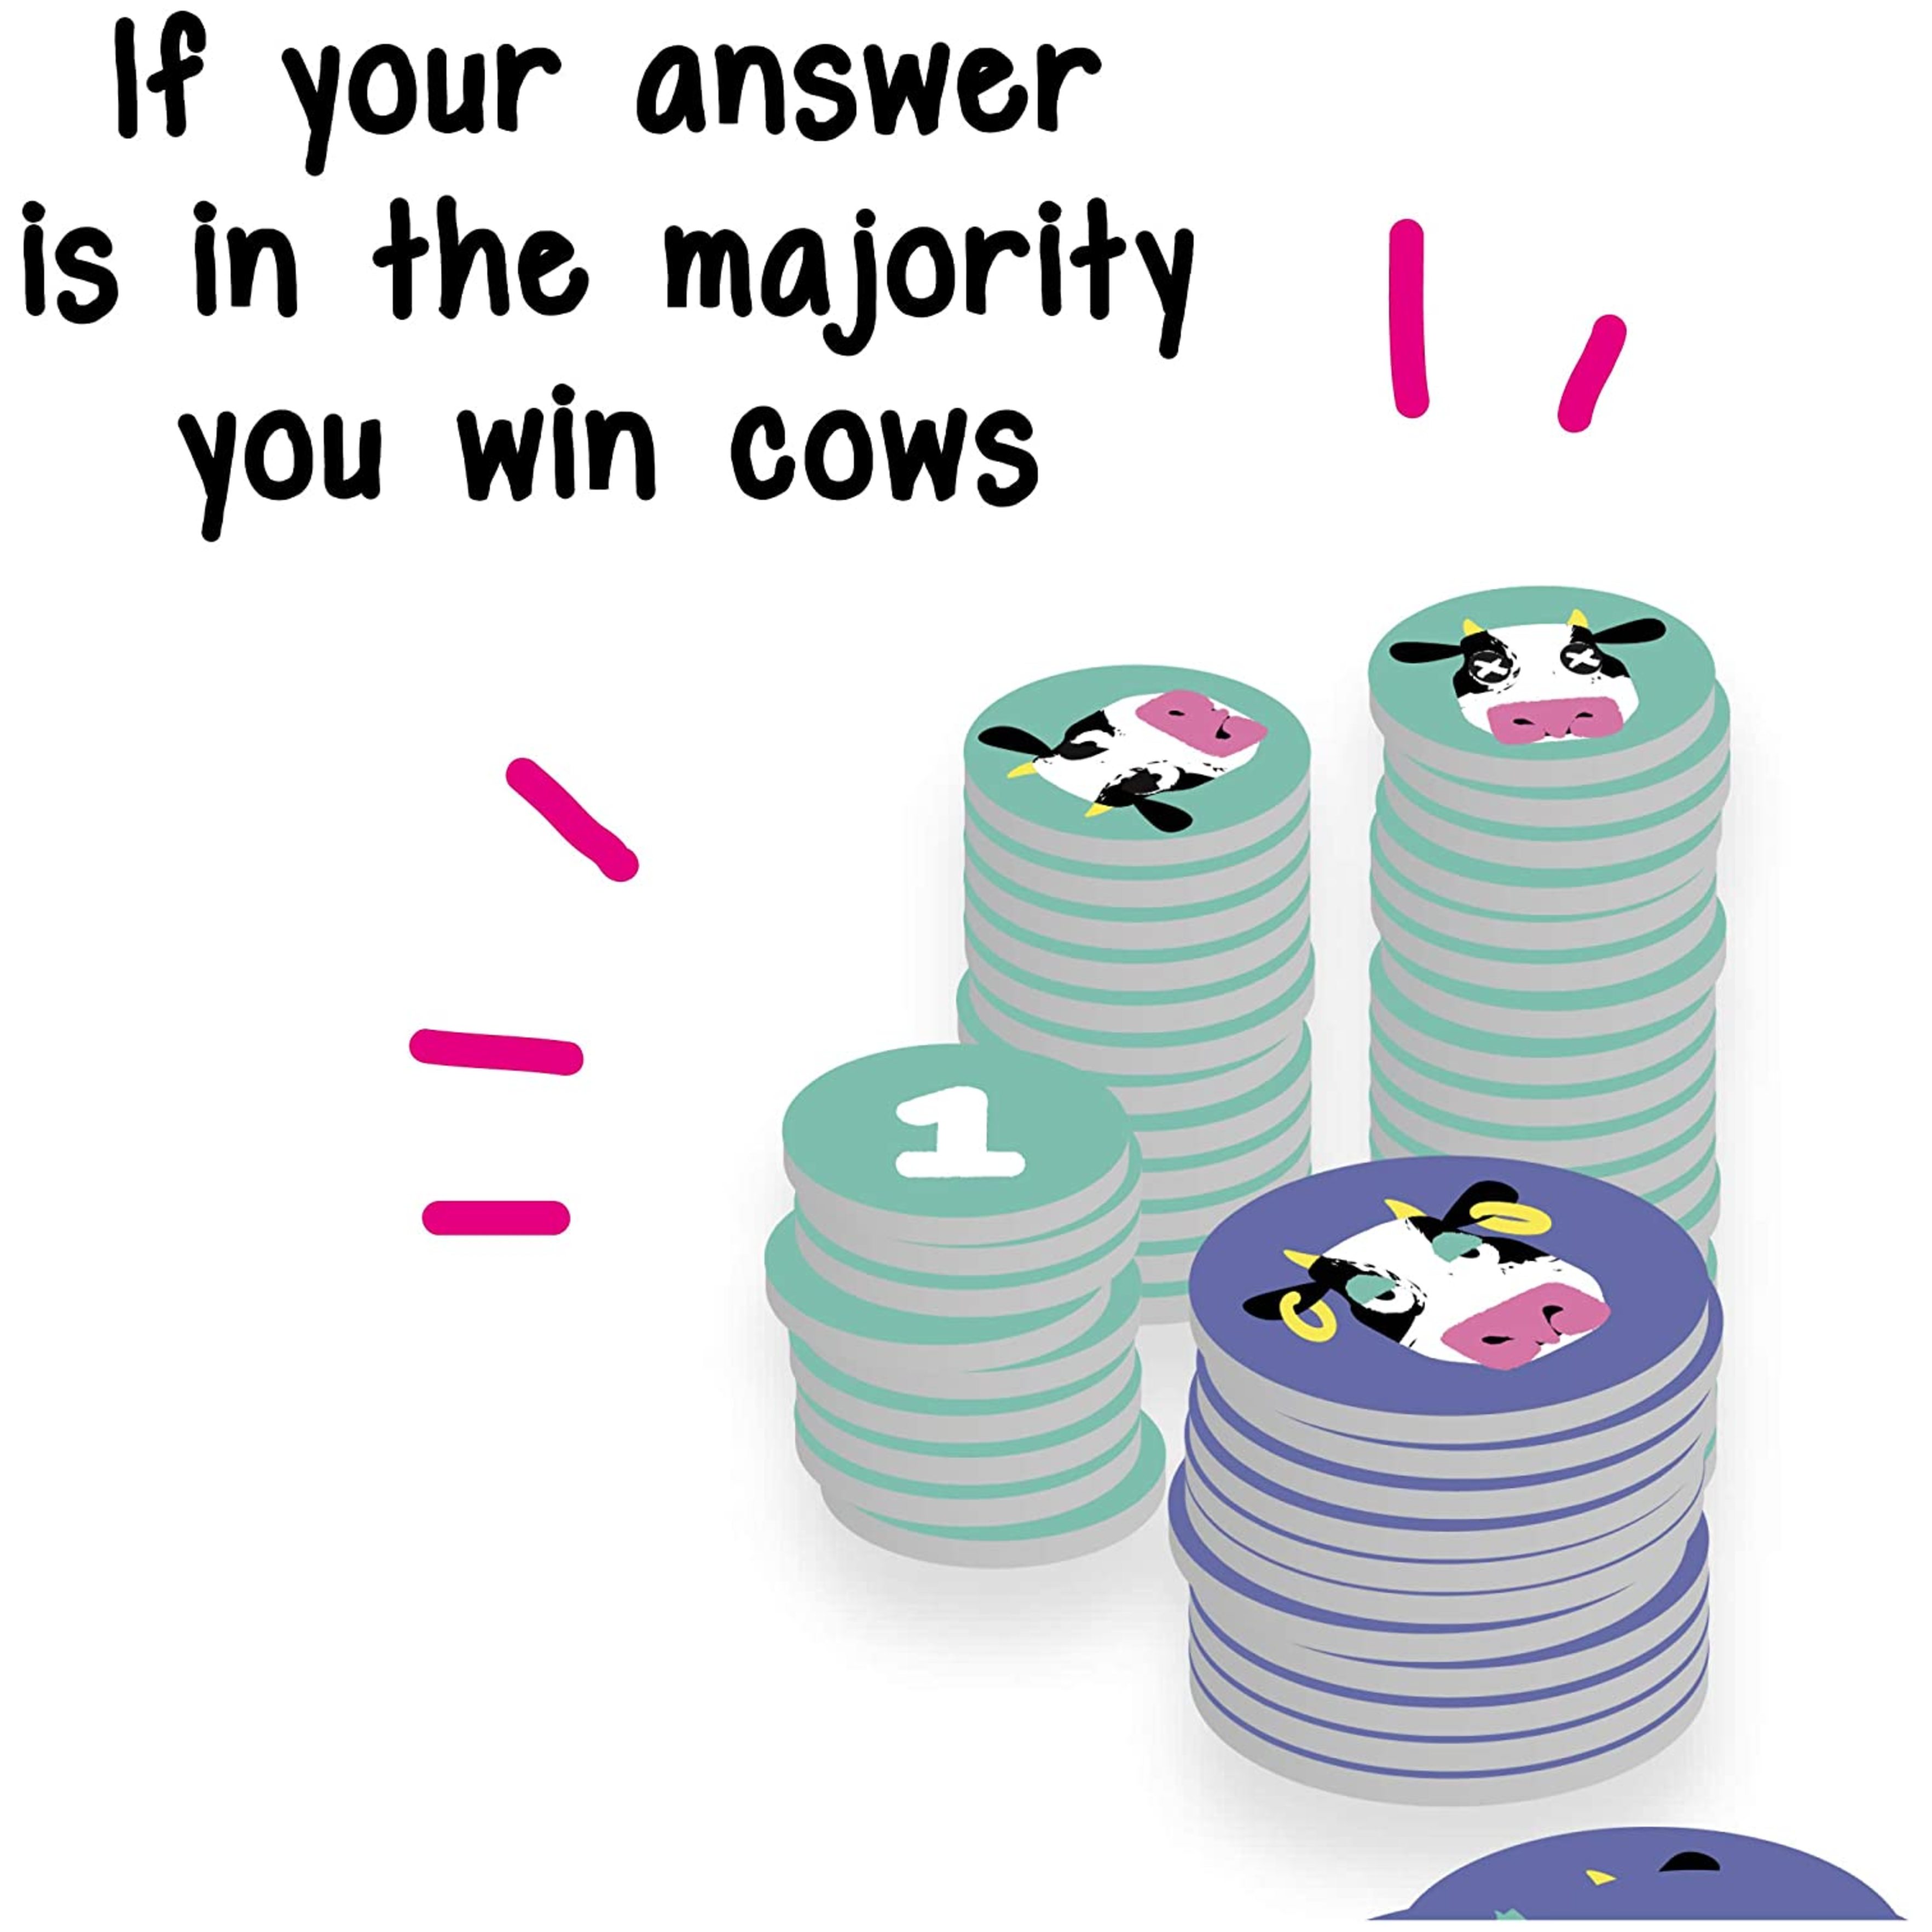 Herd Mentality, The Moolicious Board Game, for Families and Kids Ages 10 and up - image 4 of 8